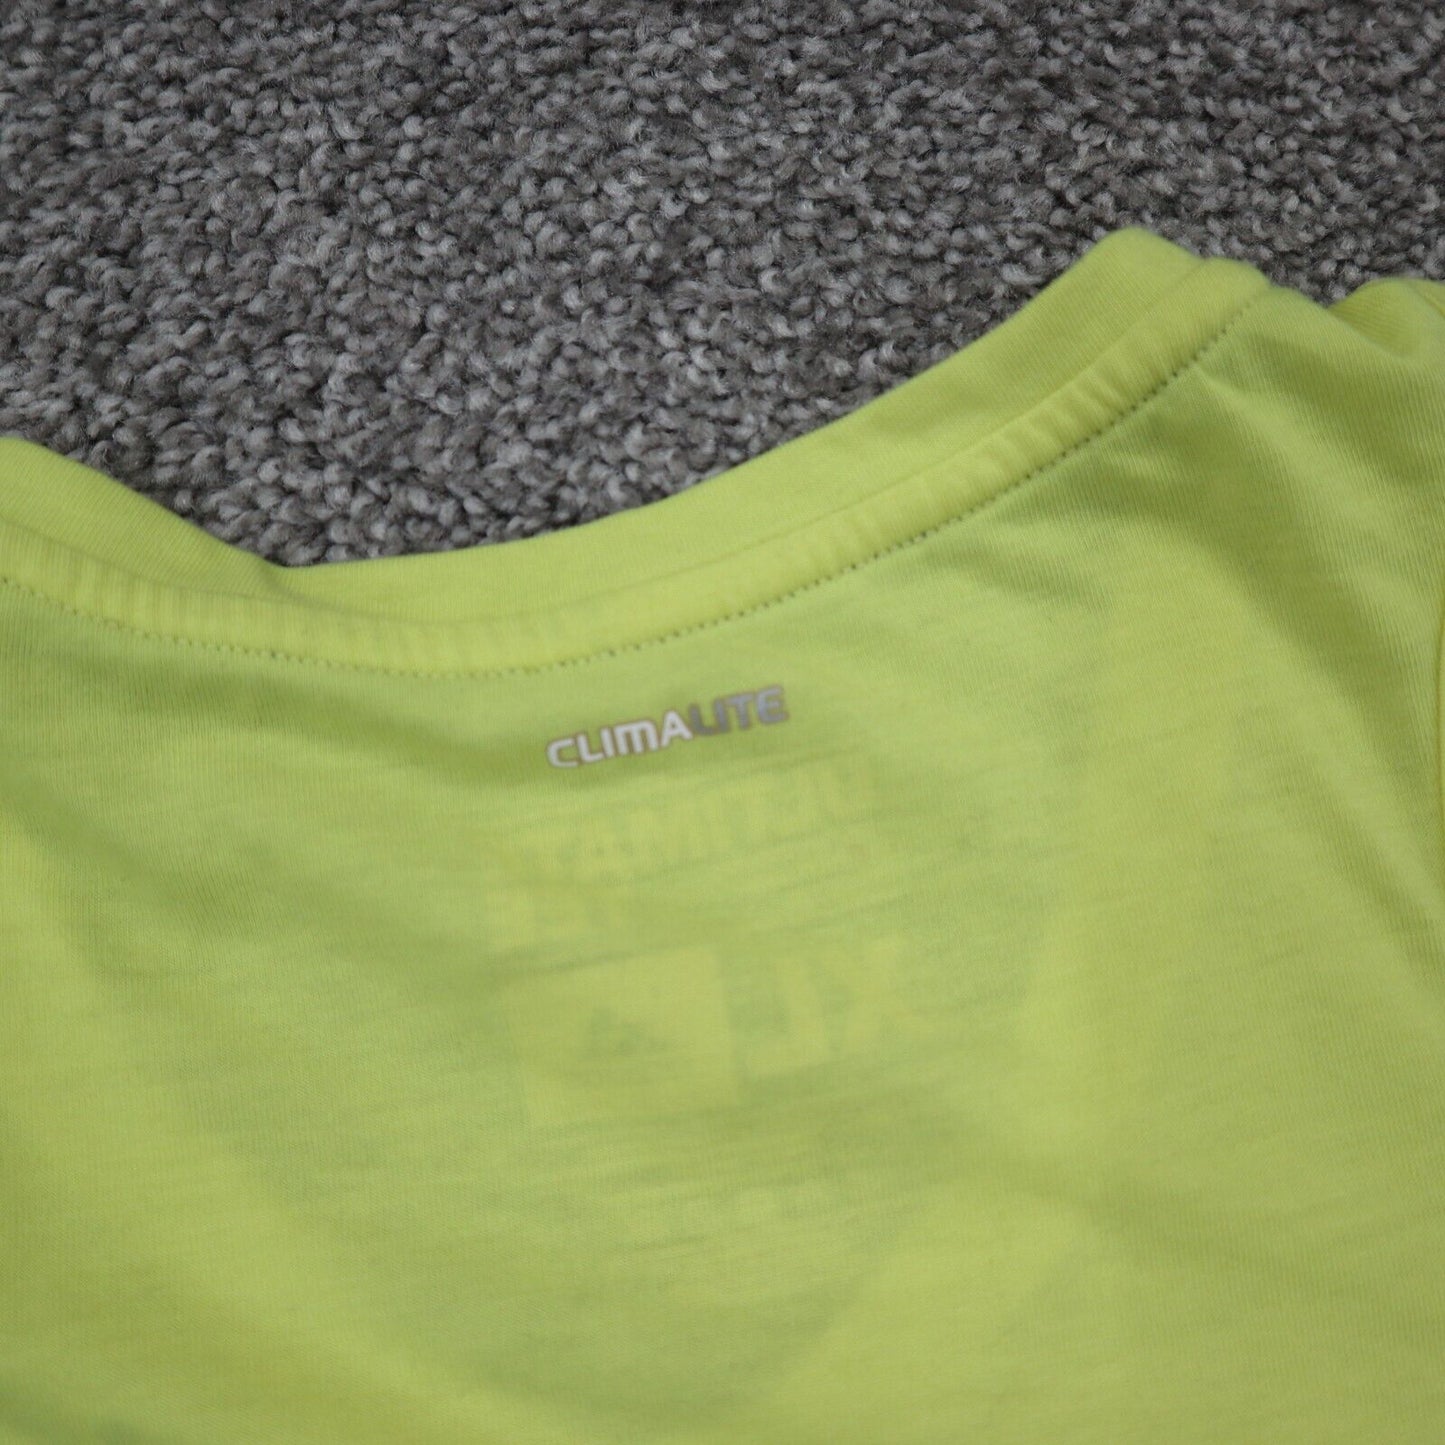 Adidas Ultimate Womens Casual Tank Top Sleeveless Light Lime Green Size X Large